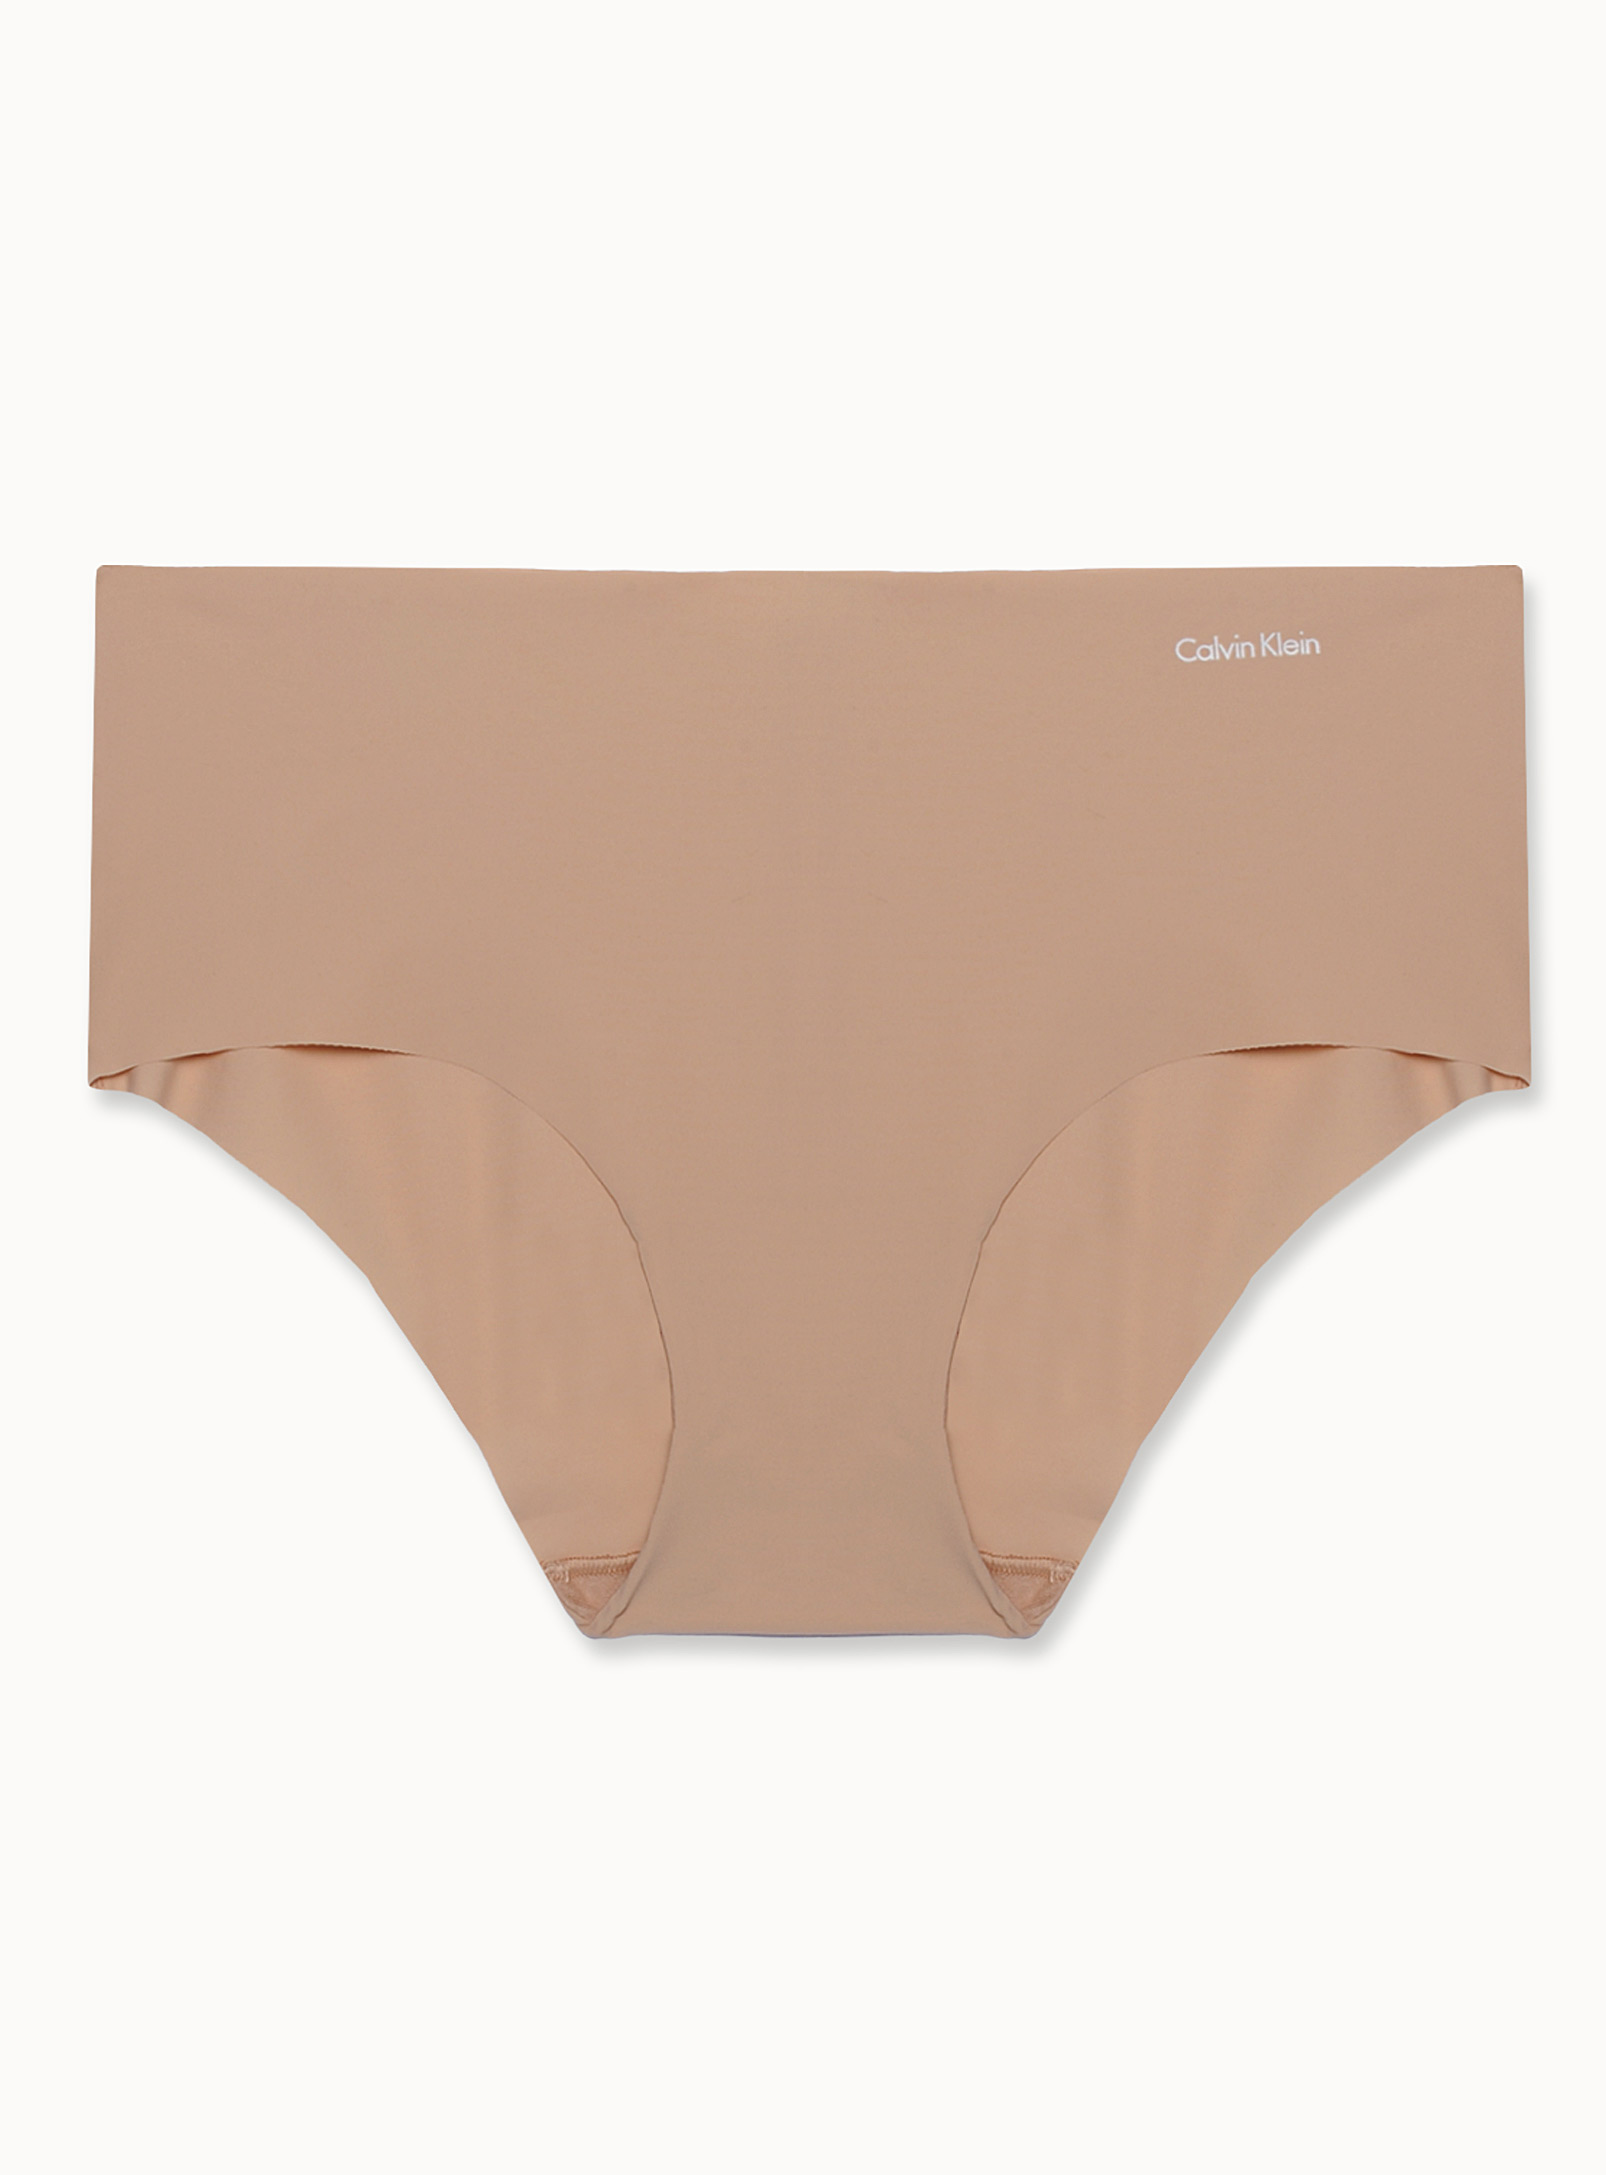 Calvin Klein Invisibles Hipster In Tan